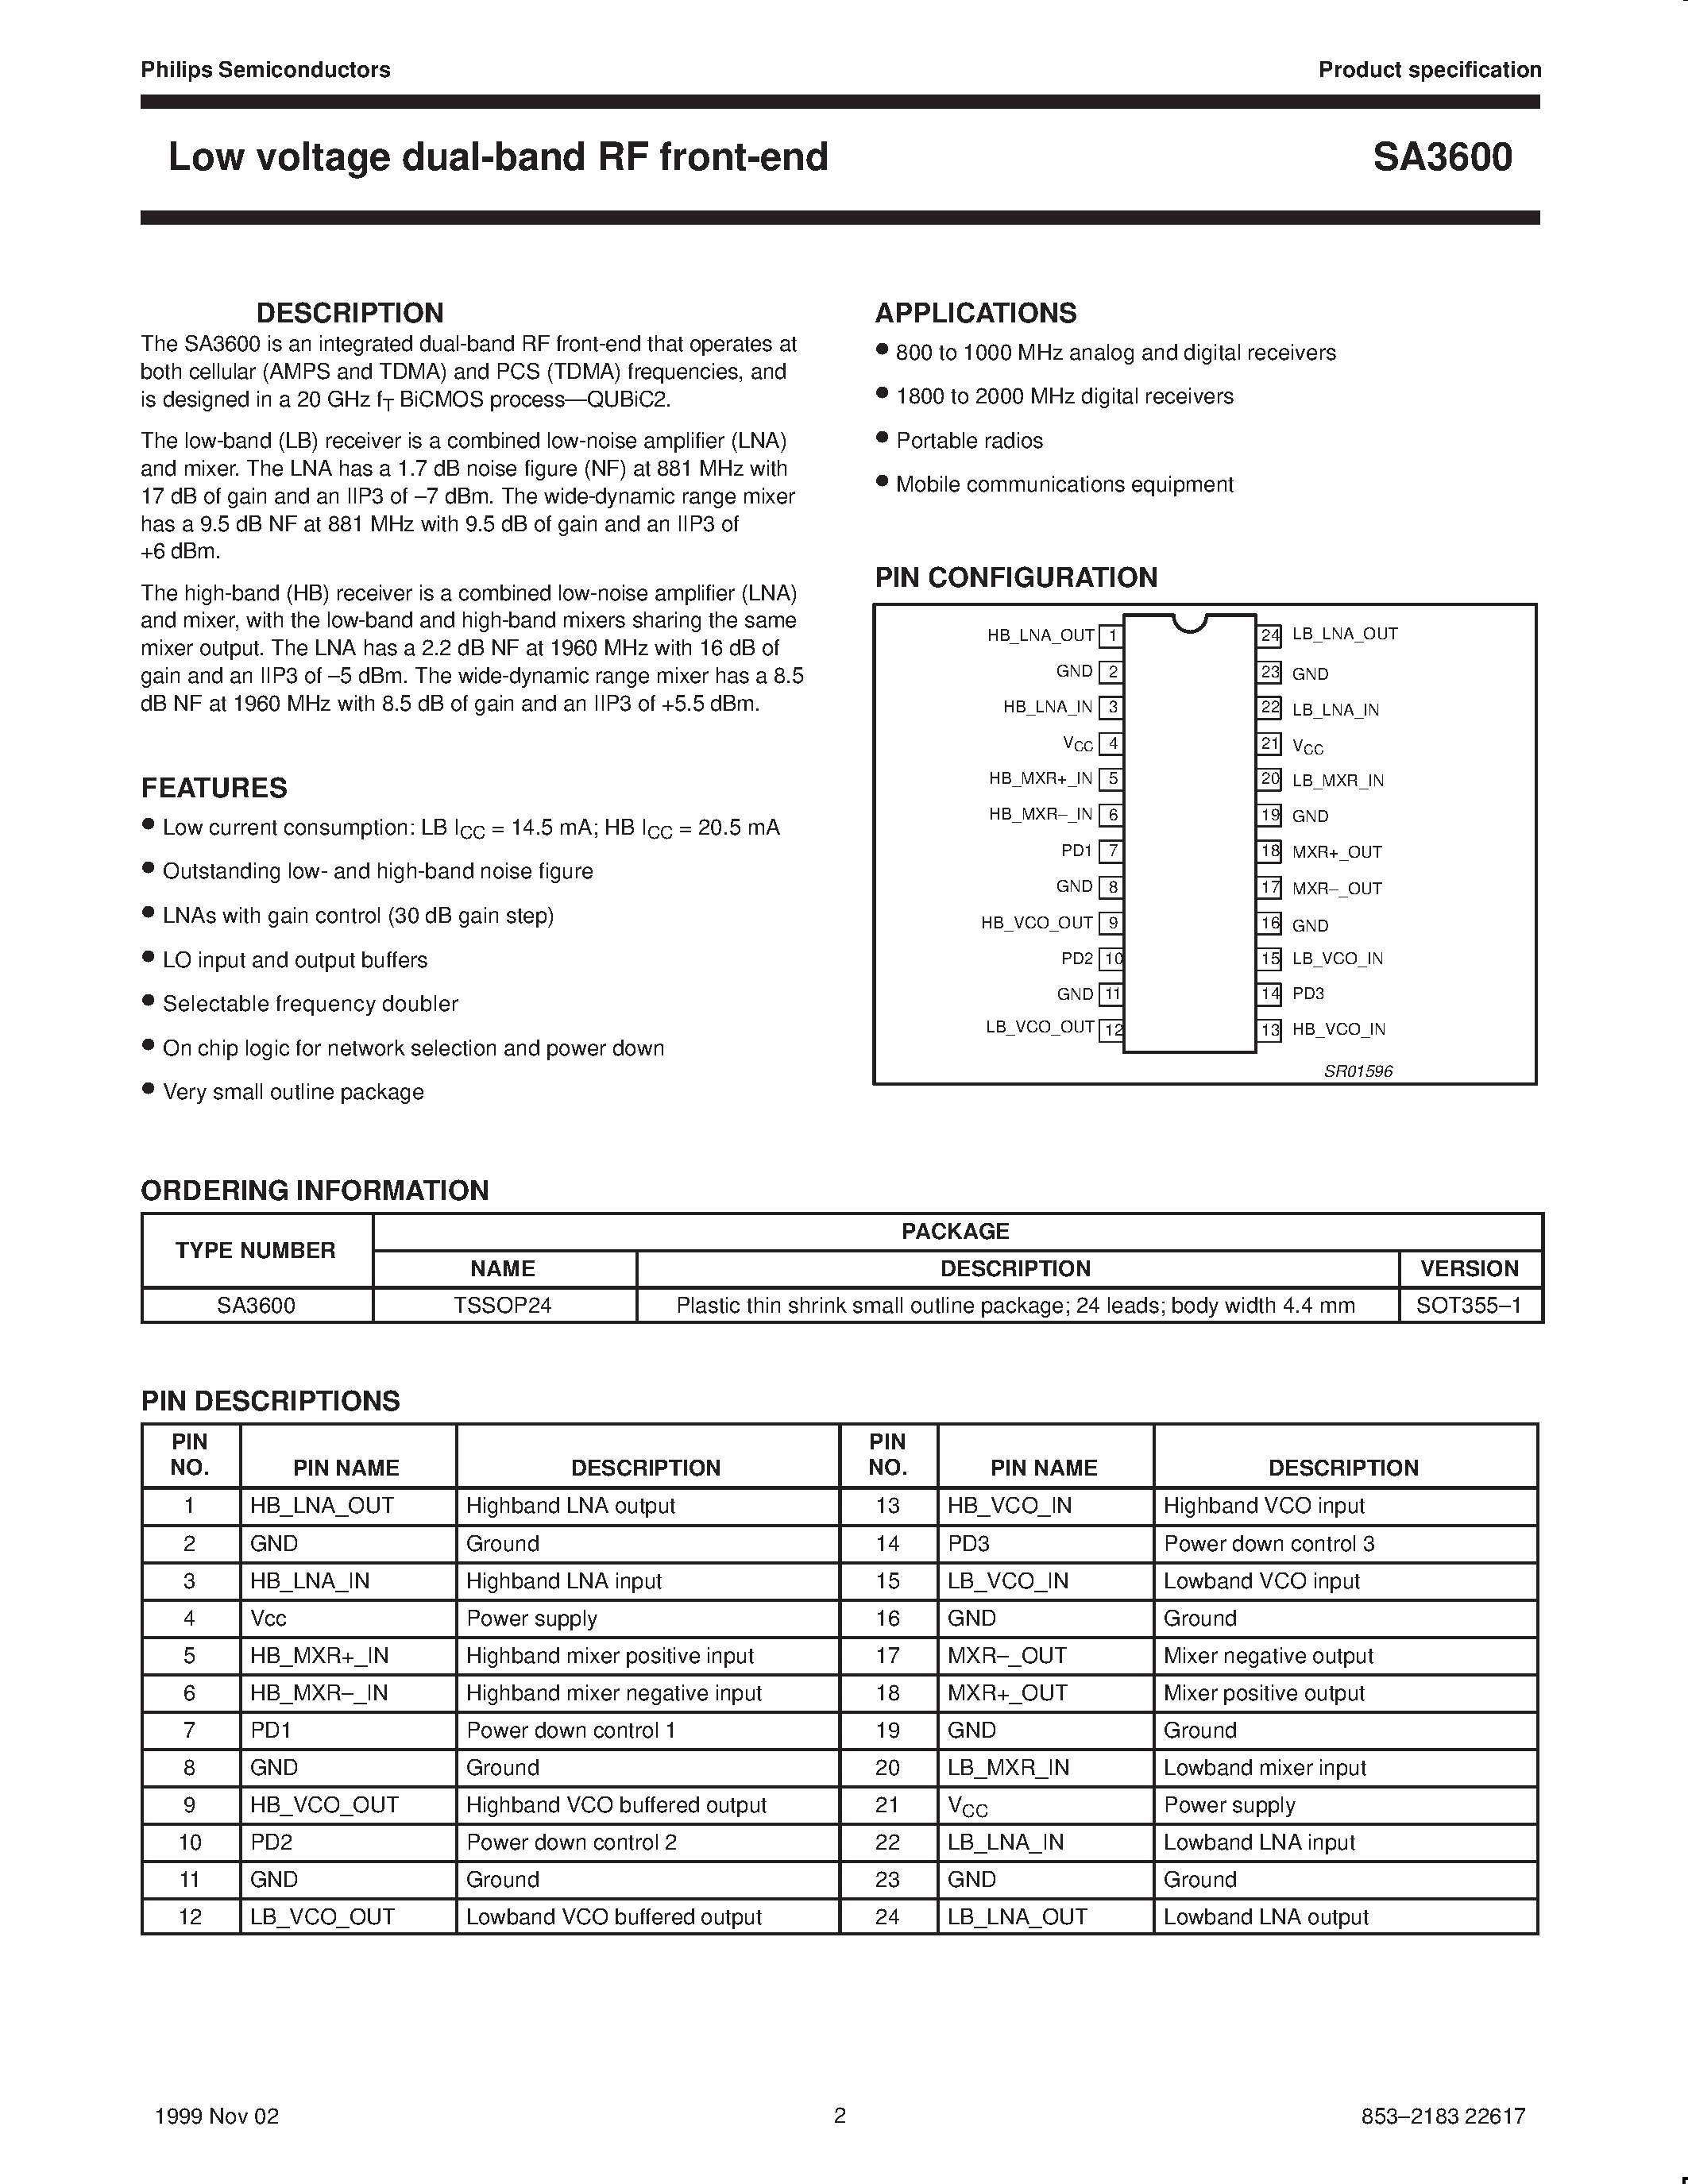 Datasheet SA3600 - Low voltage dual-band RF front-end page 2